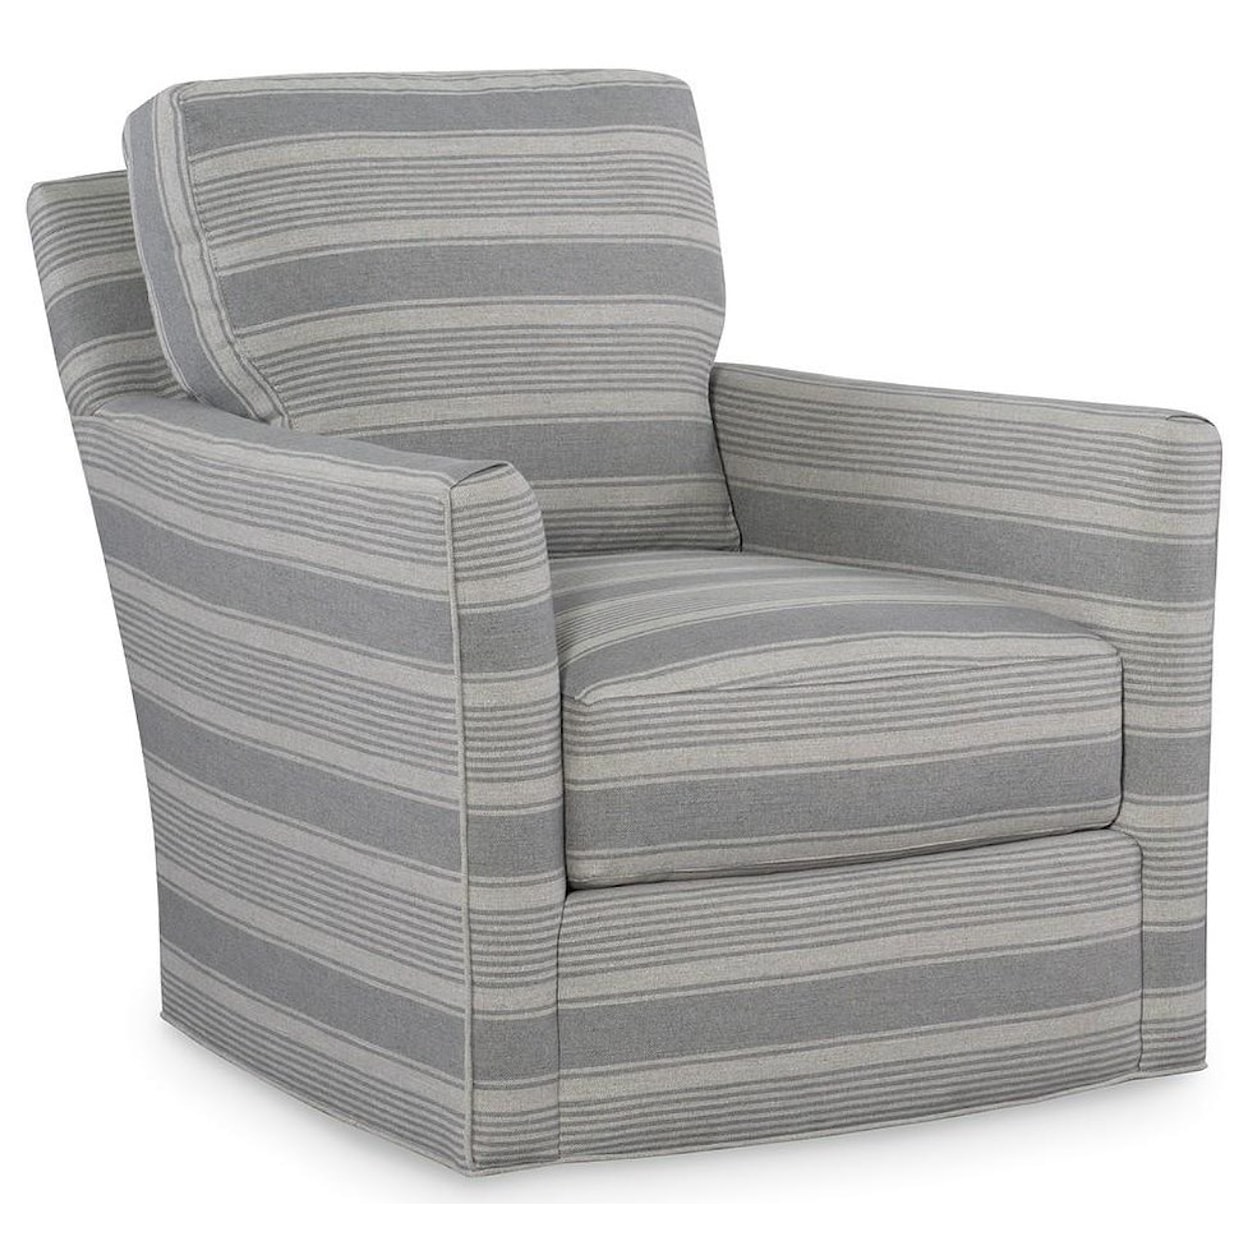 C.R. Laine Murphey Upholstered Chairs